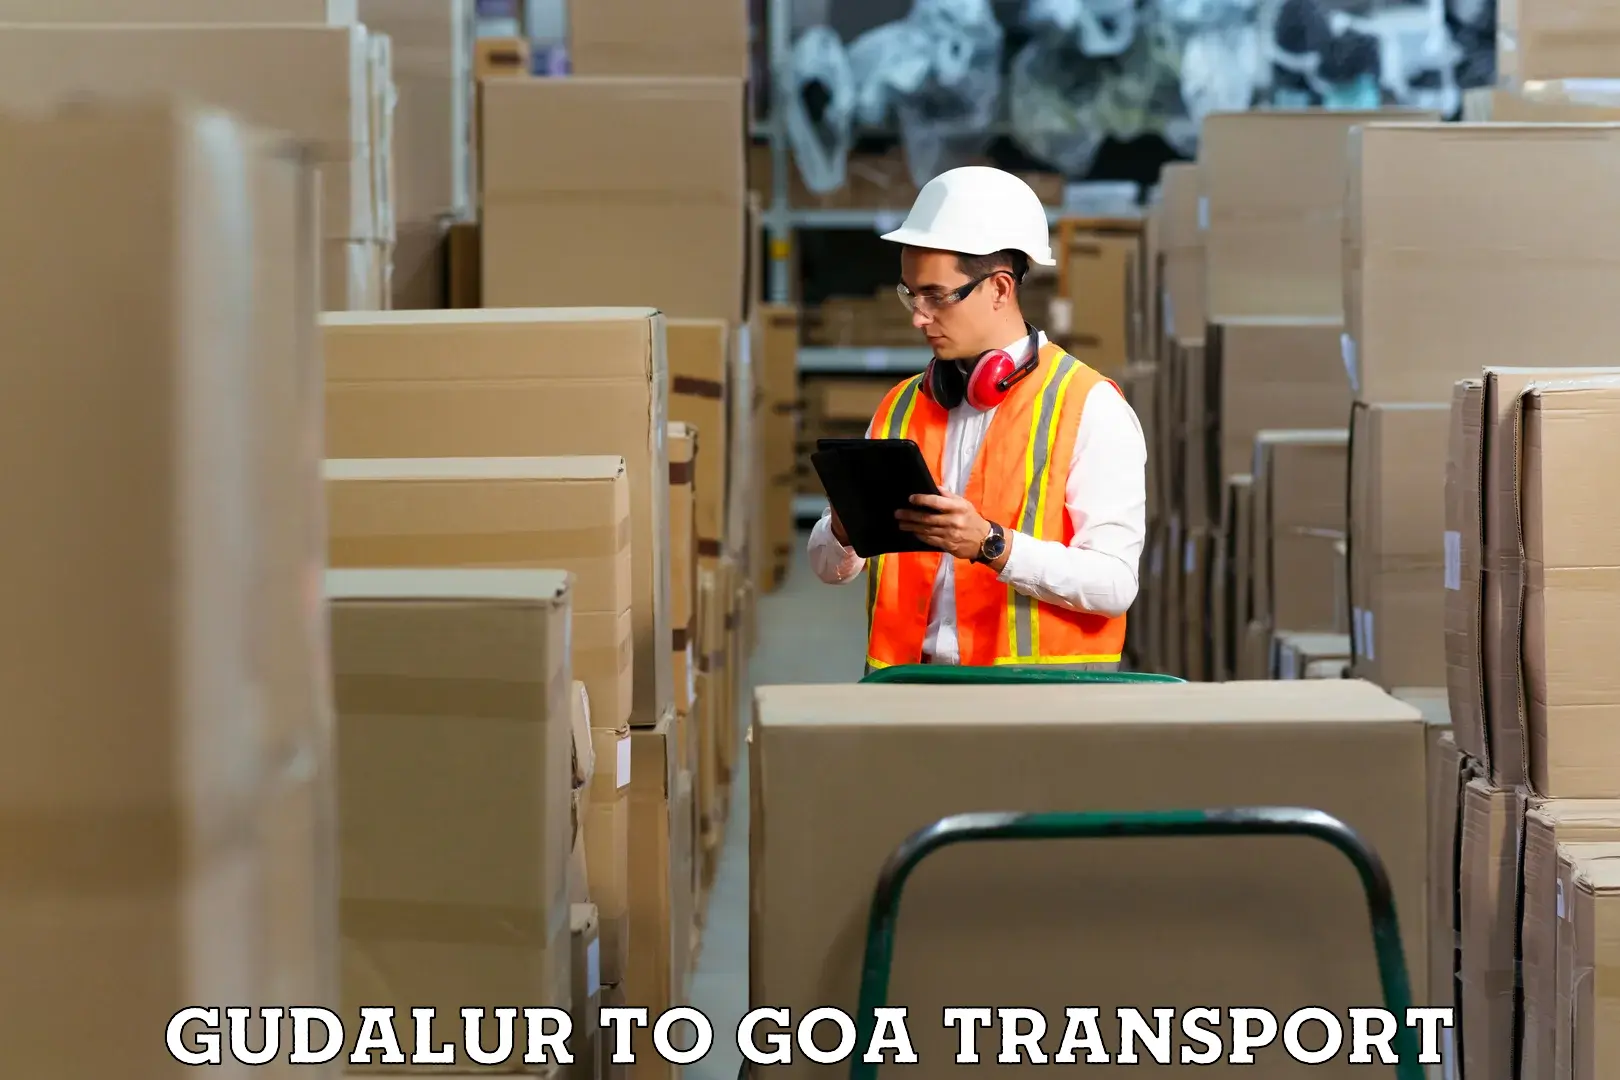 Nearby transport service Gudalur to IIT Goa